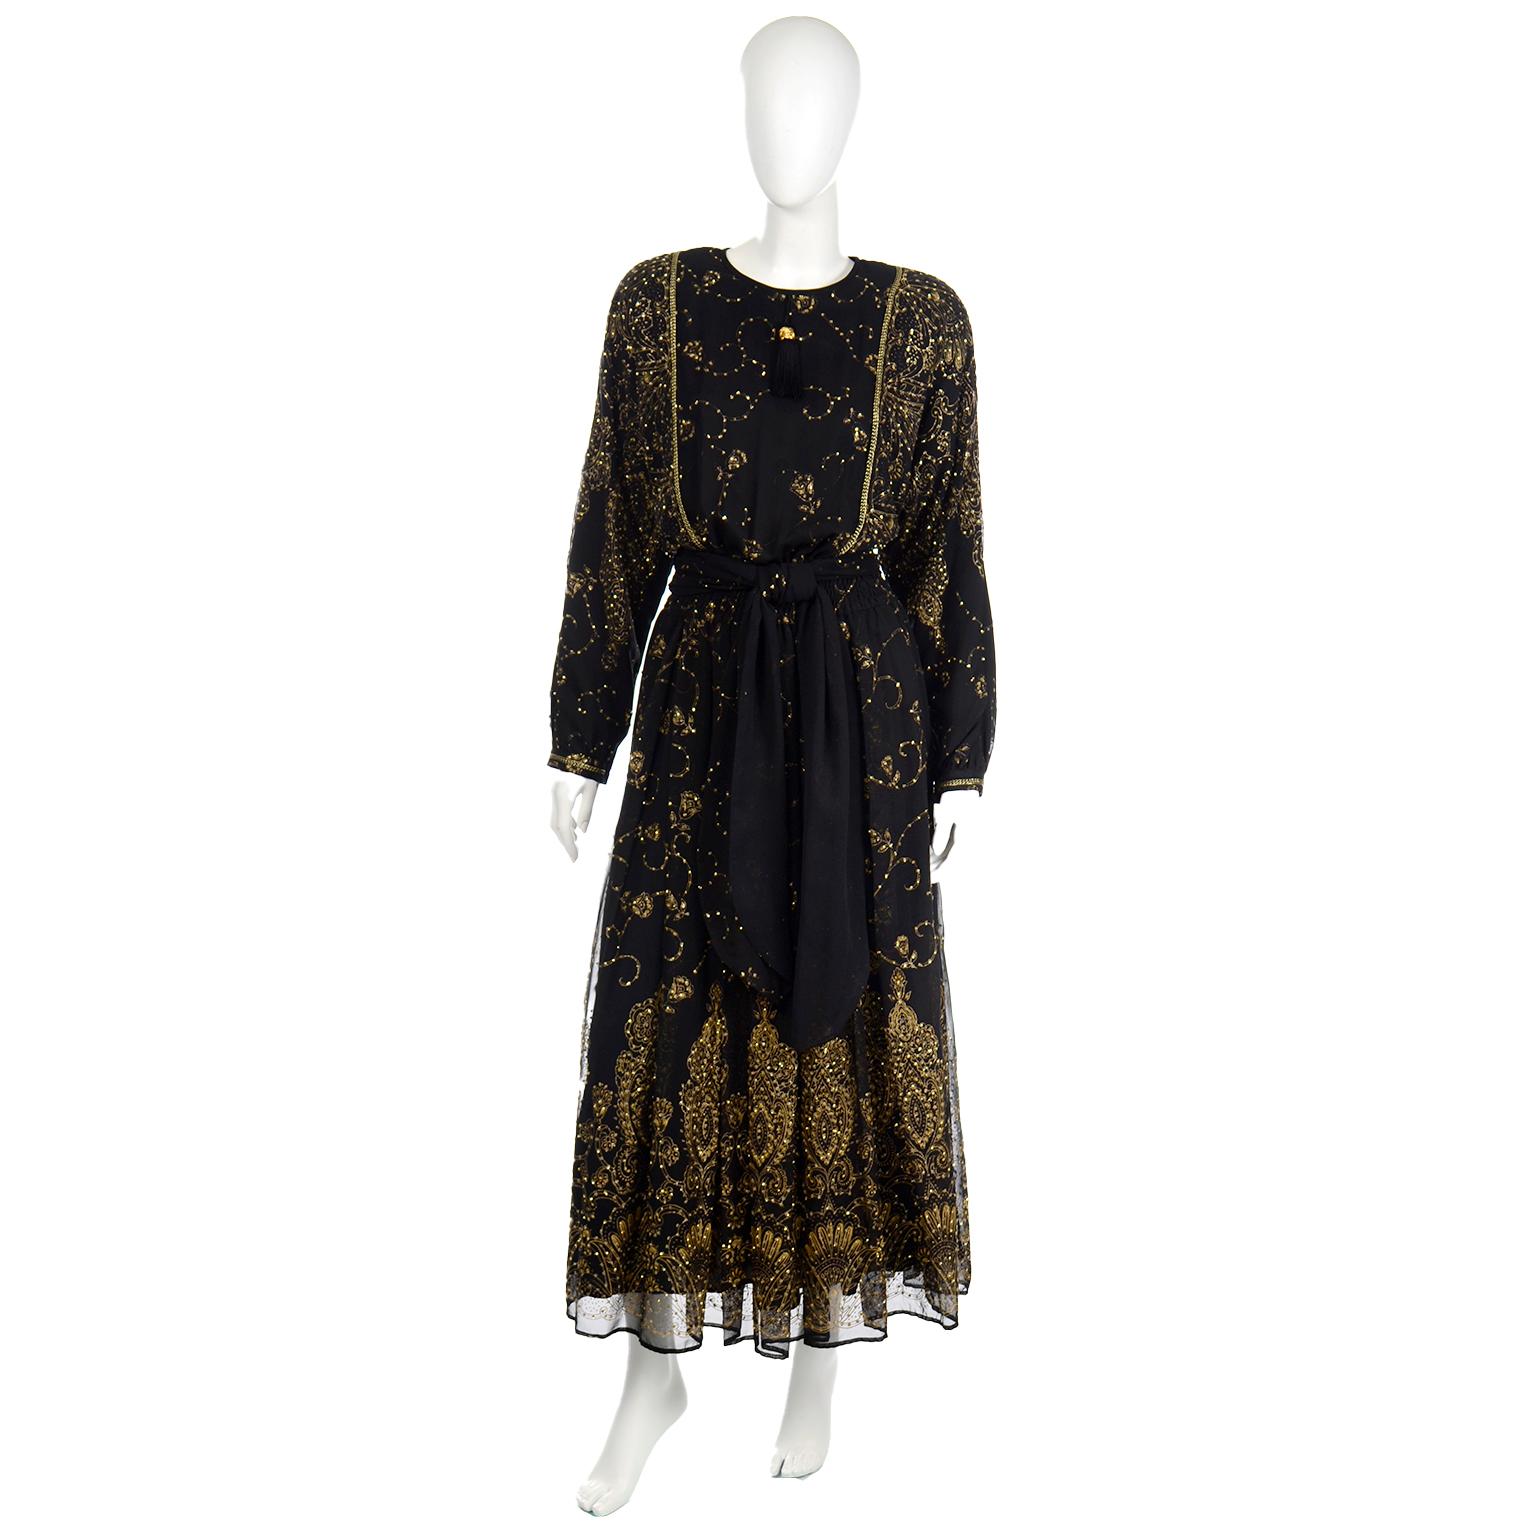 This is a stunning, very unique Diane Freis Original sheer black and gold shiny evening gown with a matching sash style scarf. We acquired this evening dress from a woman who had the most unusual Diane Freis dresses we've ever seen!  The dress has